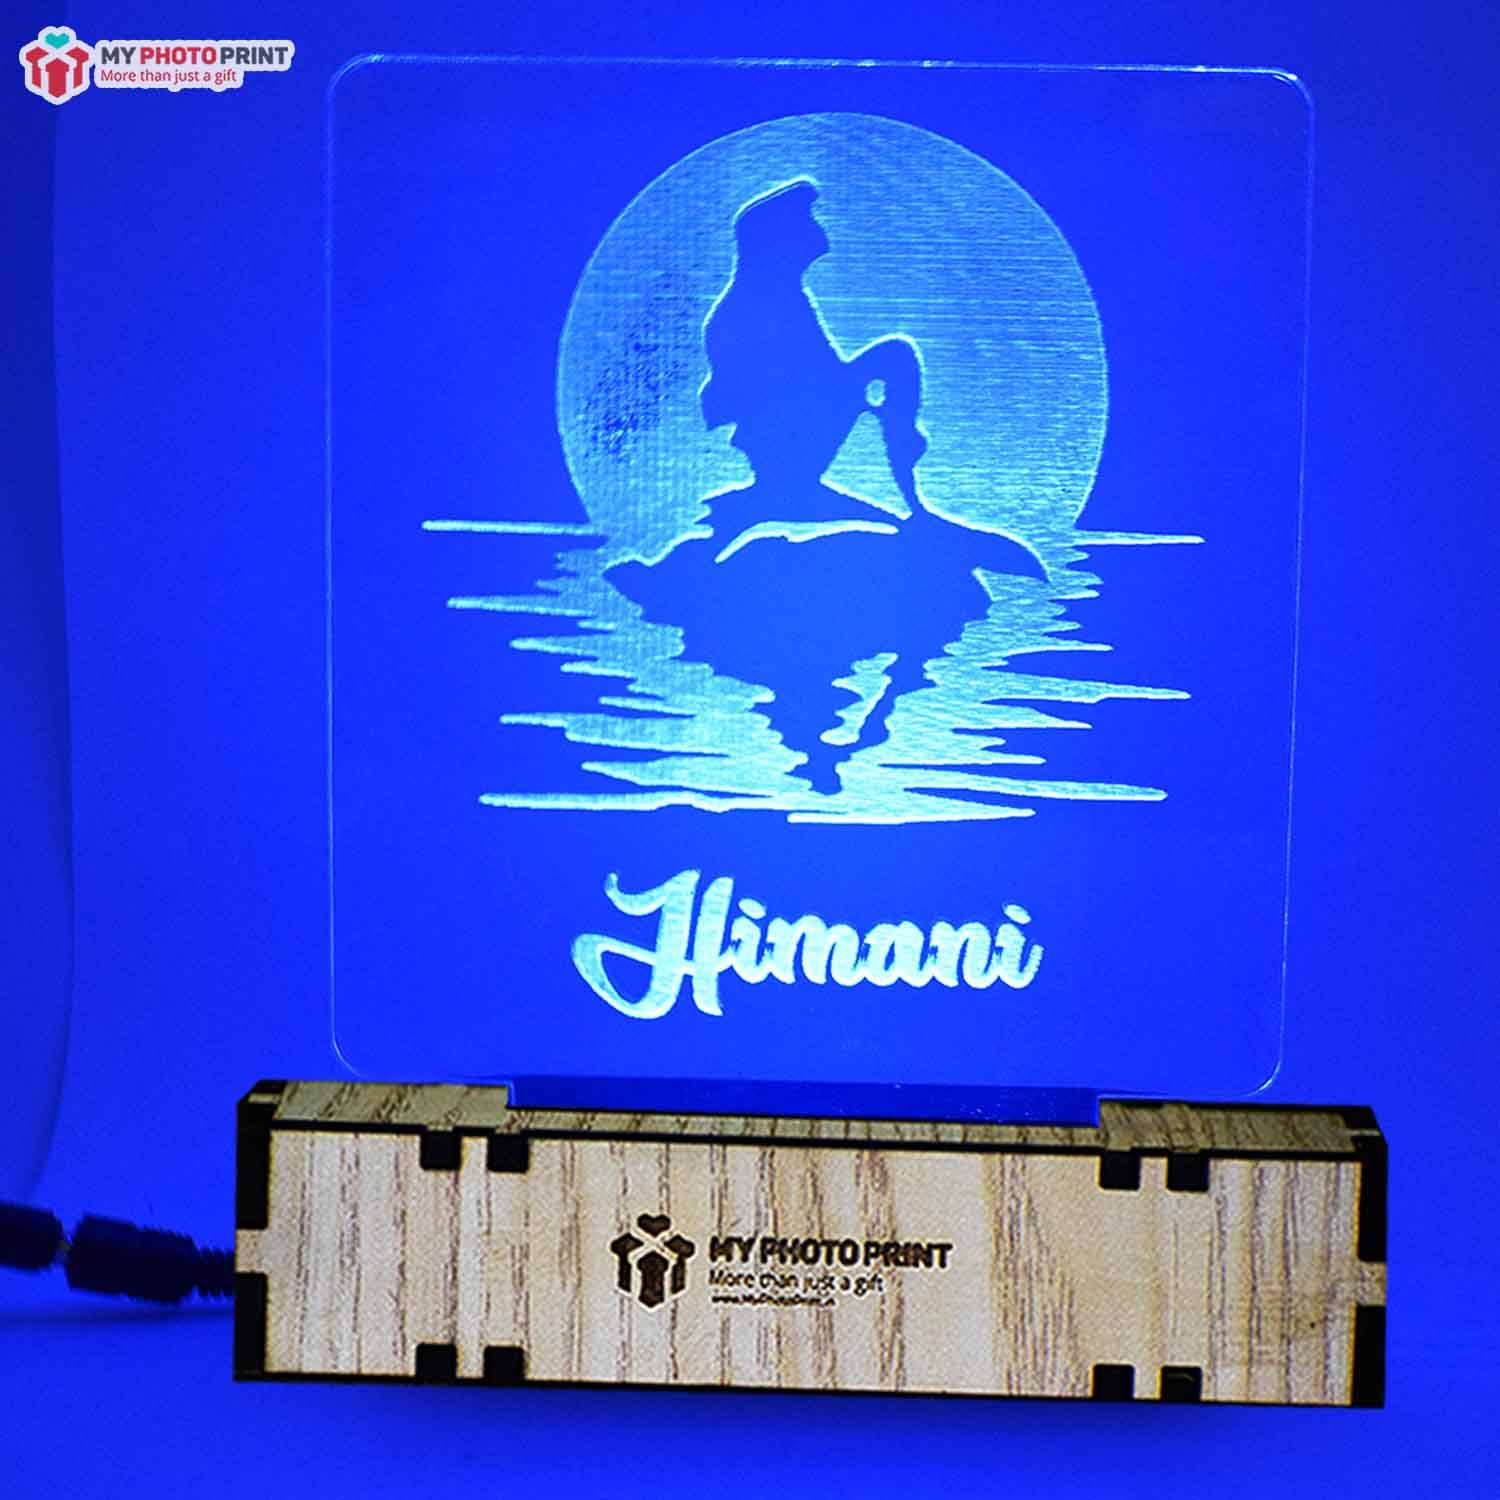 Personalized Mermaid Acrylic 3D illusion LED Lamp with Color Changing Led and Remote#1315